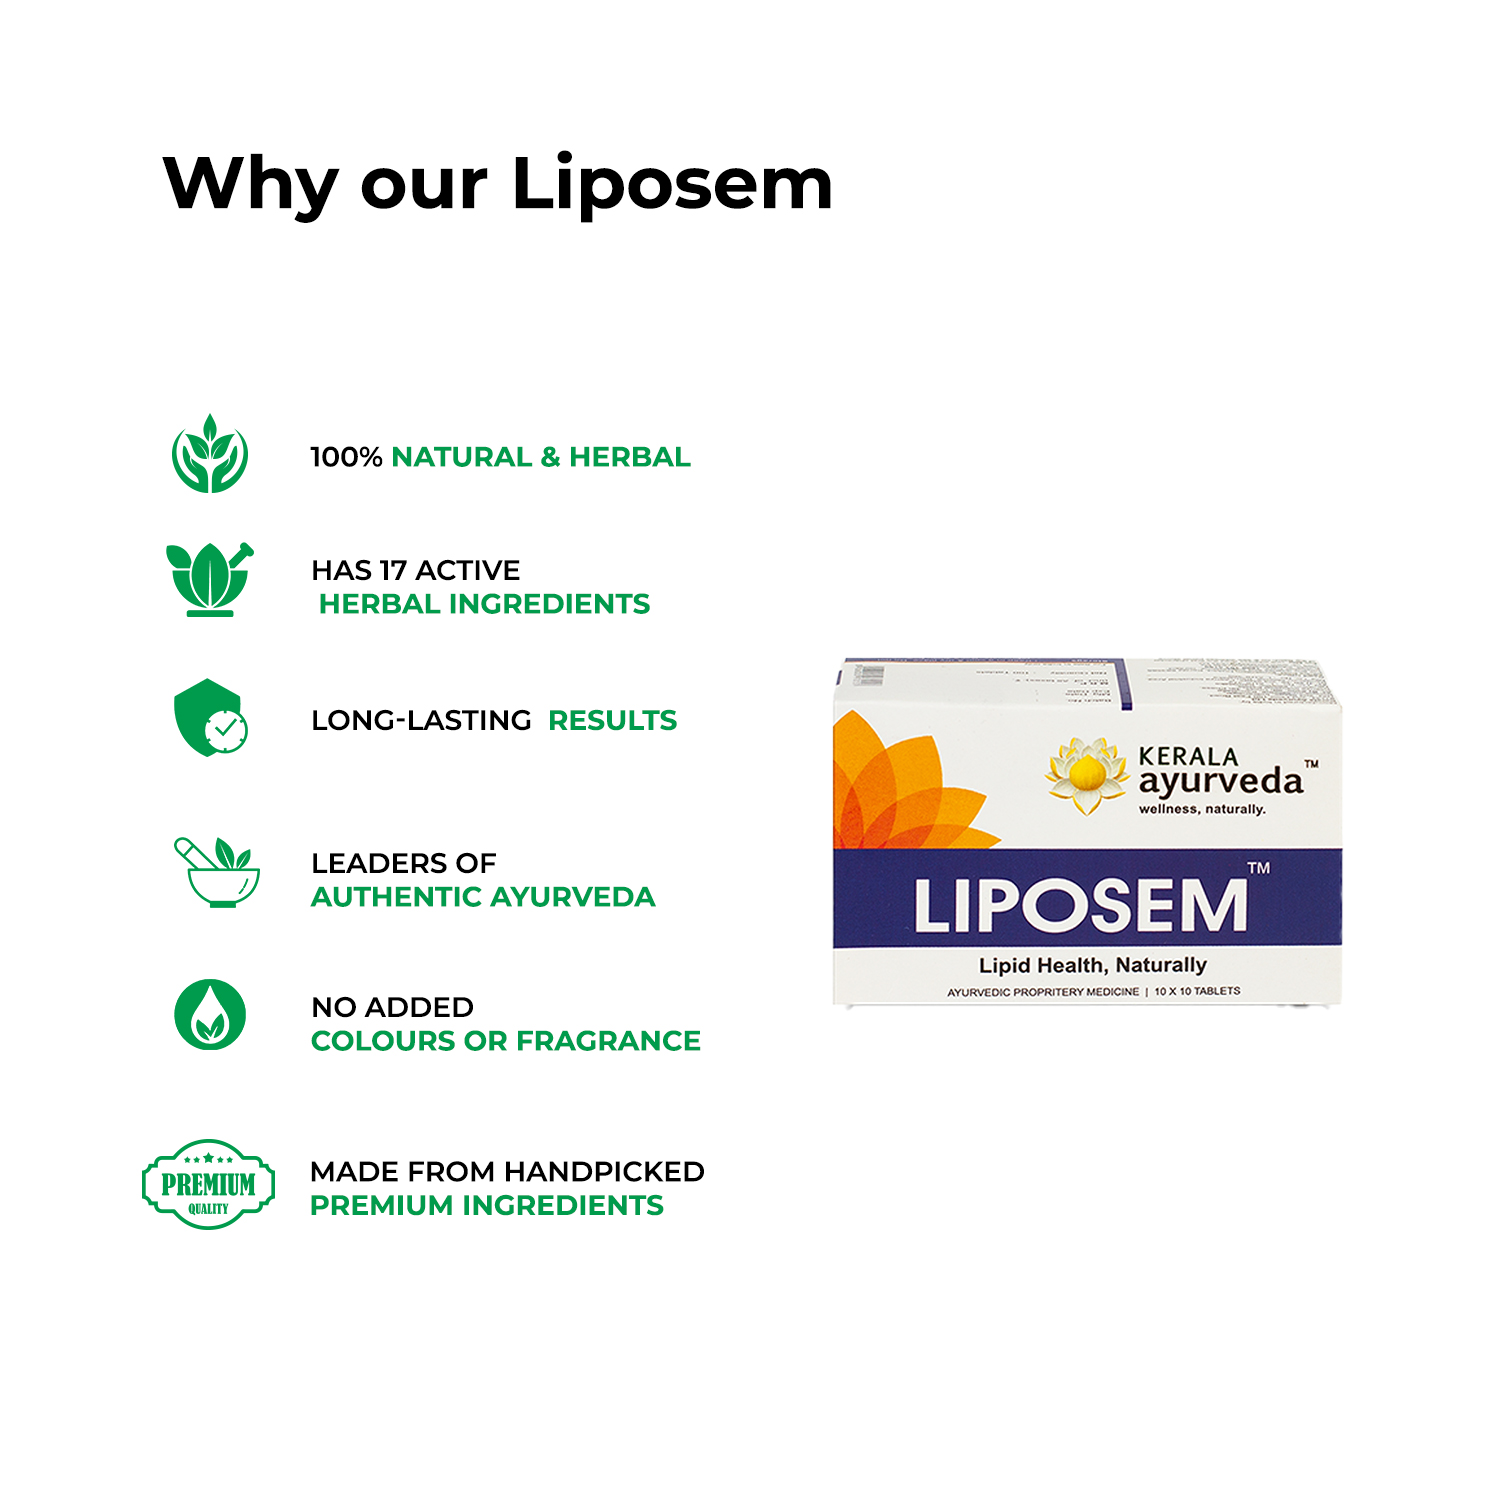 Why Choose Liposem Cholesterol Control tablets from Kerala Ayurveda Limited